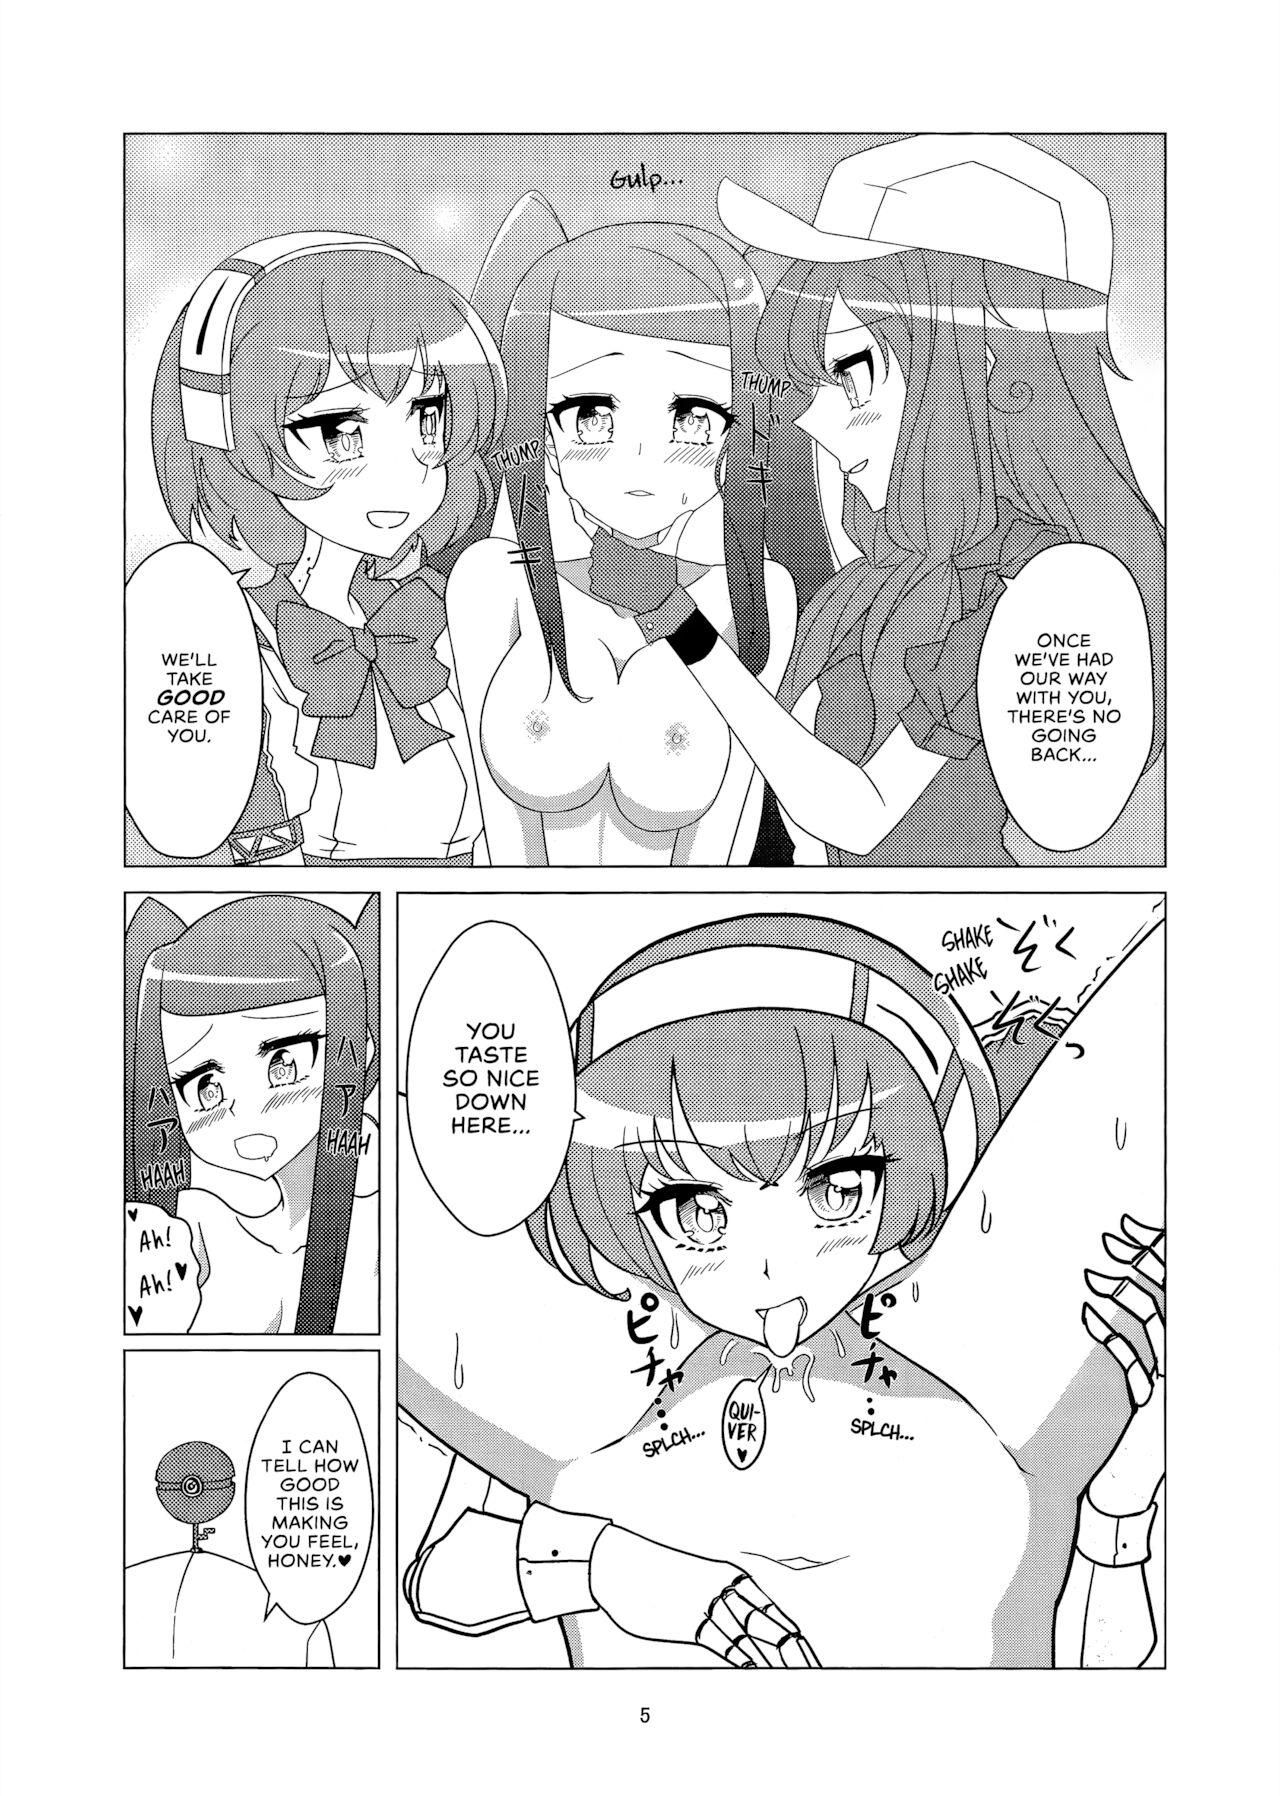 Breasts Angel's Share - Va-11 hall-a Pure 18 - Page 4